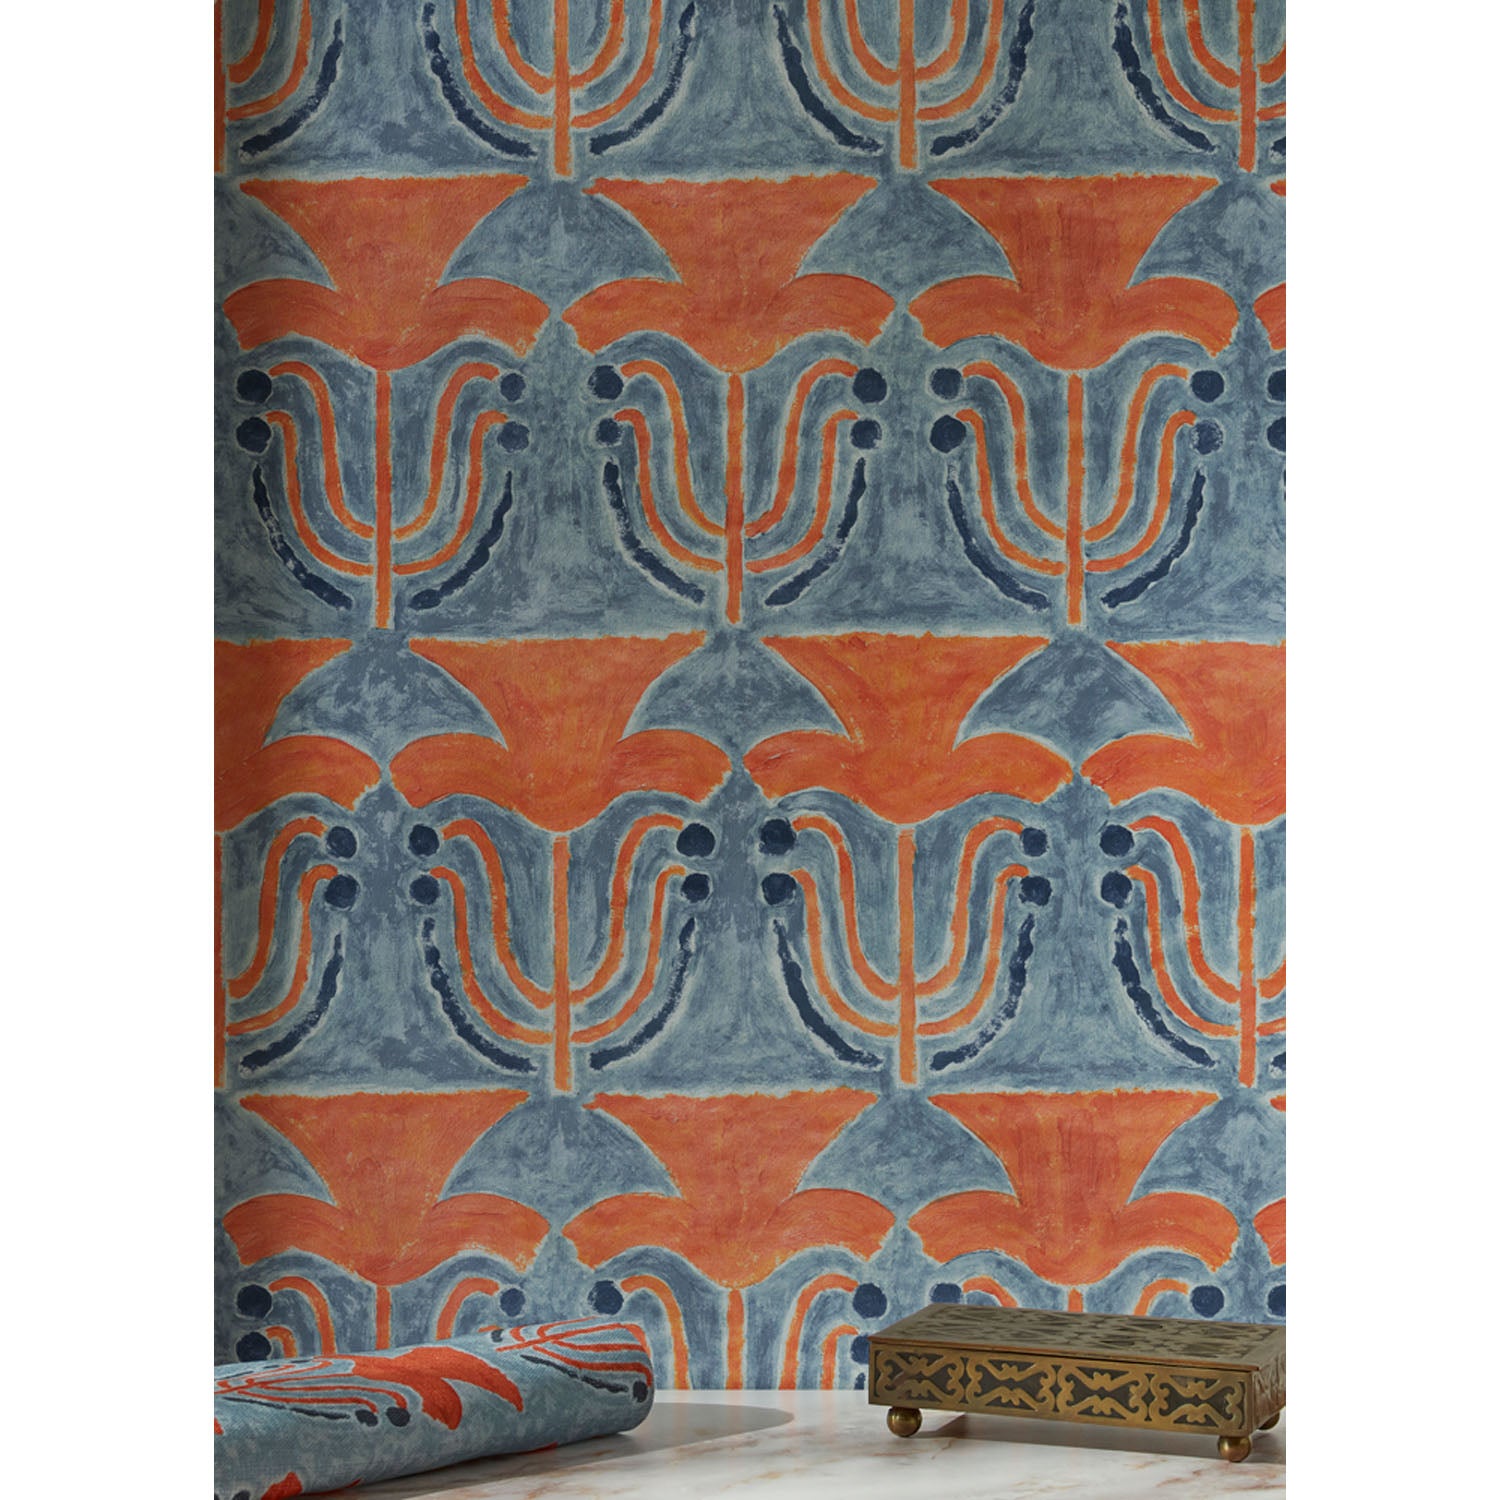 A small bronze filigree box and folded fabric swatch in front of a wallpaper with stamped painted floral motif in red and cobalt on a medium blue background, hover